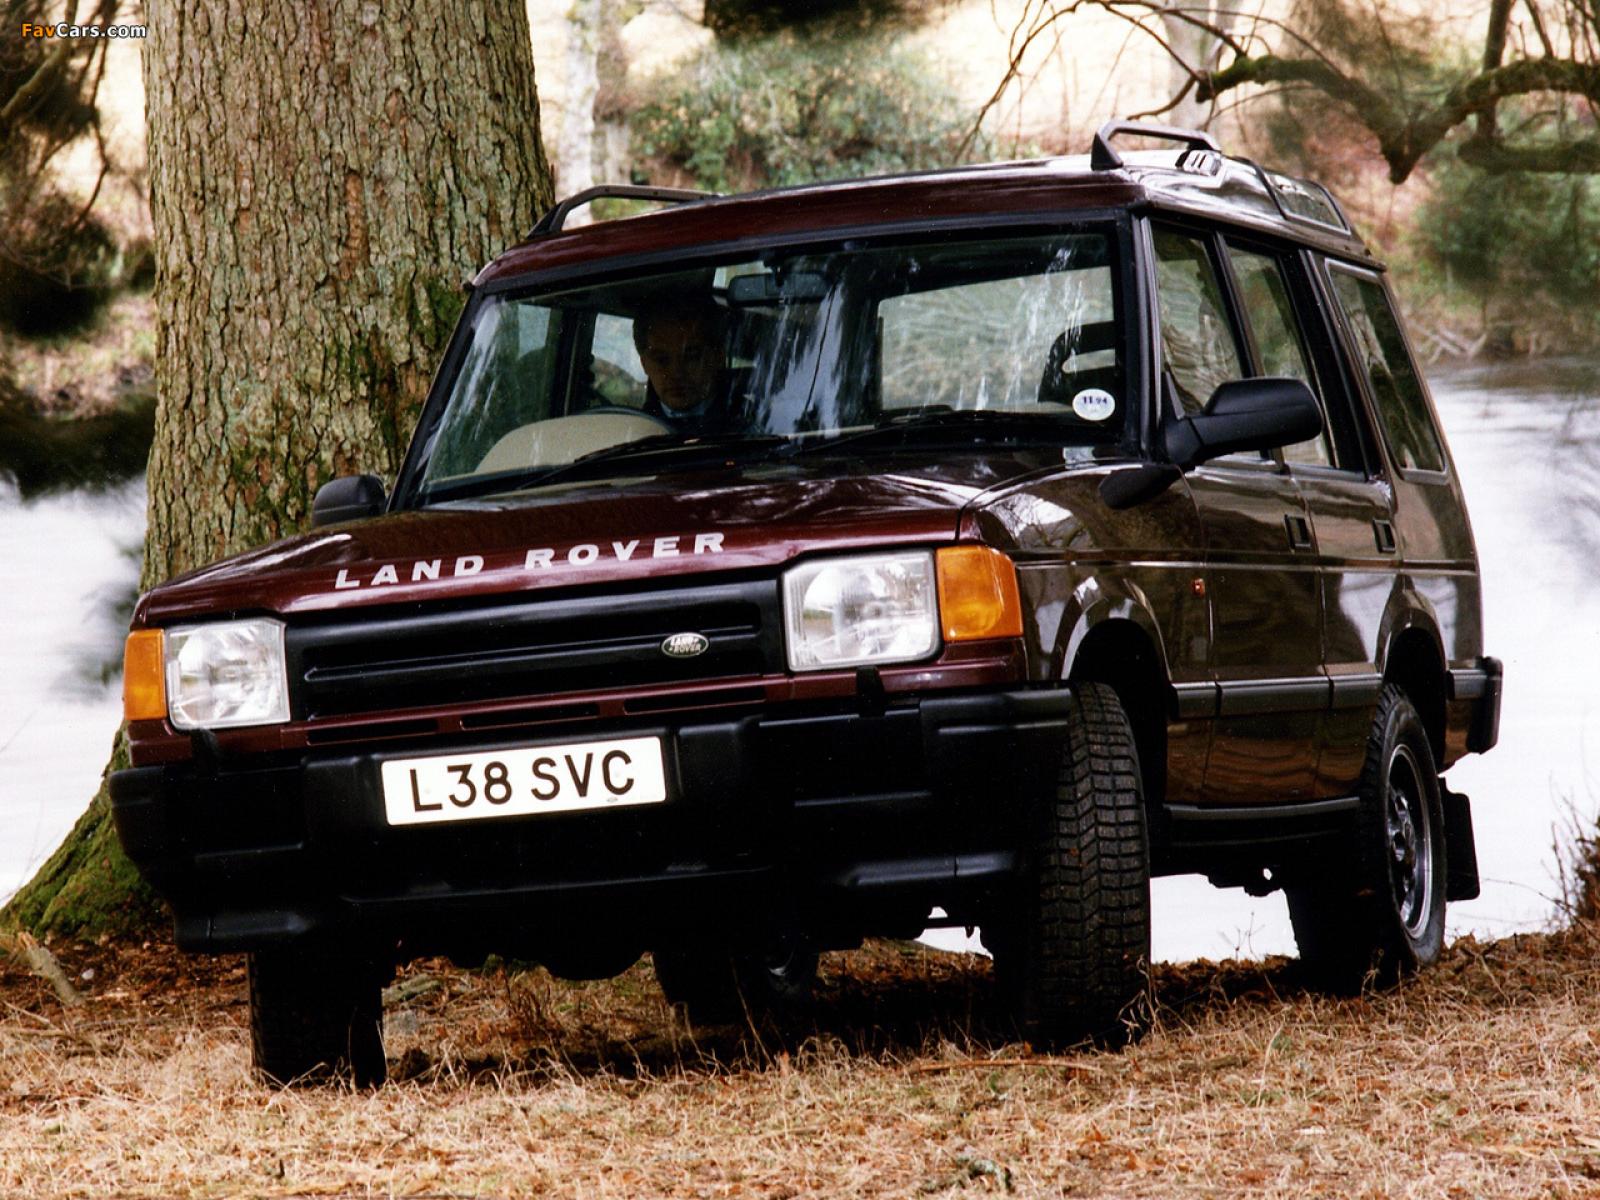 Дискавери 12. Land Rover Discovery 1. Ленд Ровер Дискавери 1994. Range Rover Discovery 1. Ленд Ровер Дискавери 1990.